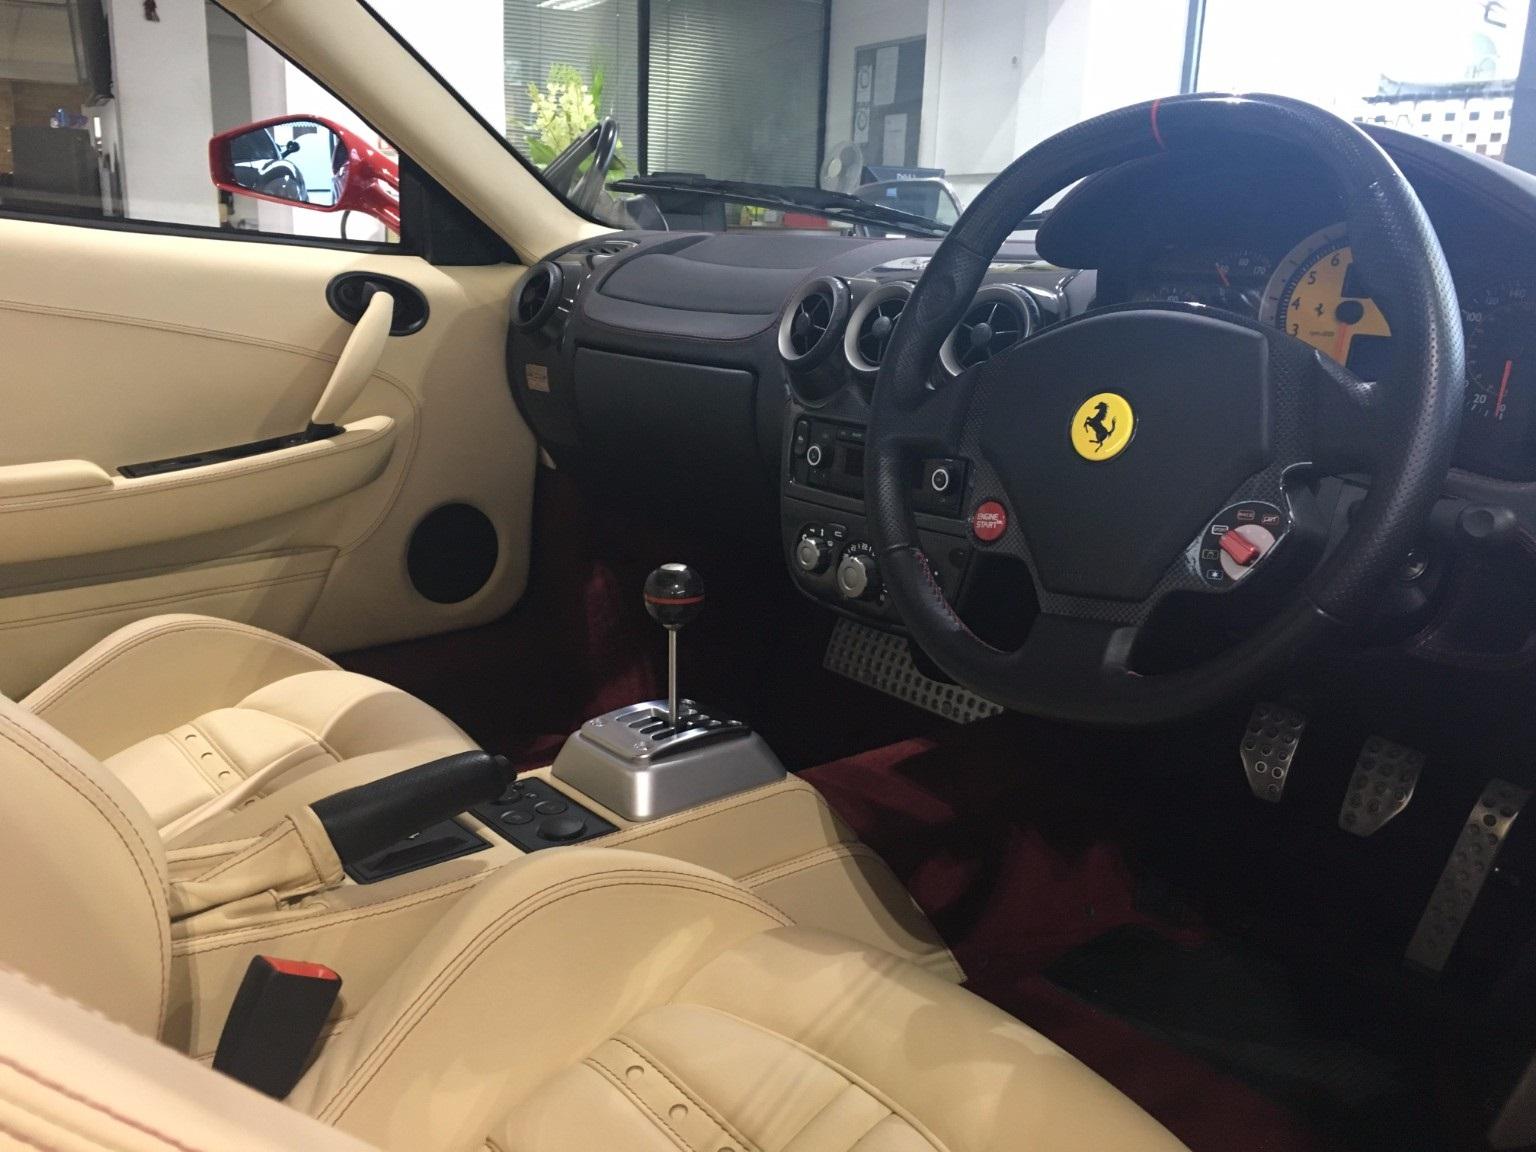 Used Ferrari F430 Coupe for sale in Epsom, Surrey